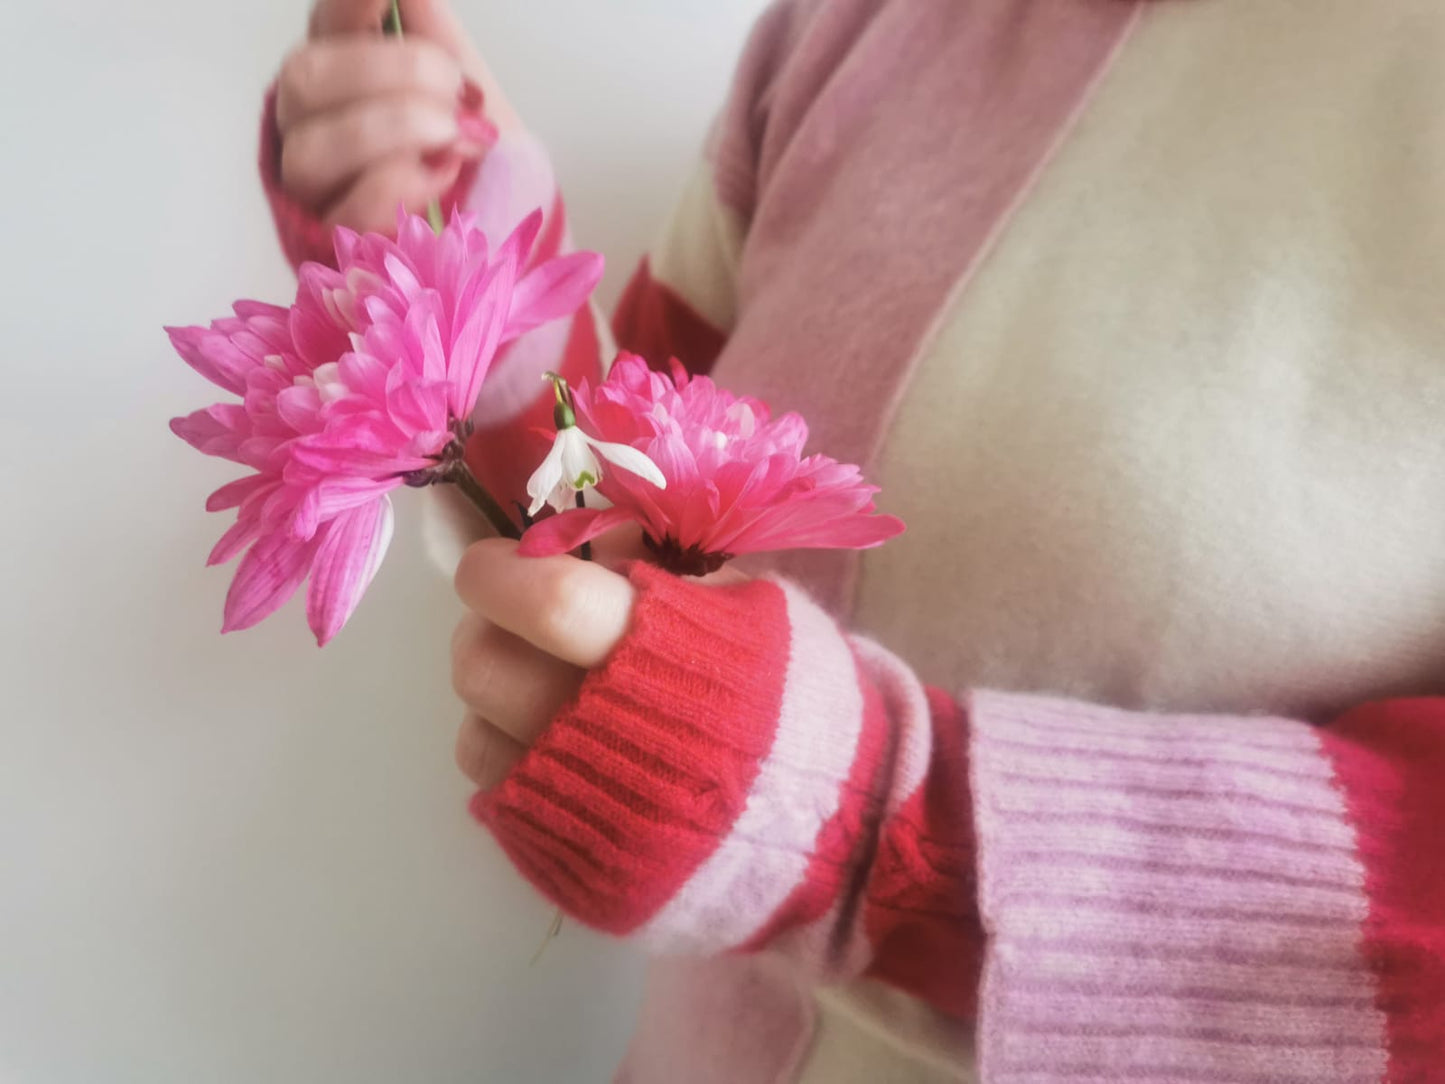 Muddle Bus 03- Pied Piper Wrist Warmers. Hands holding pink and white flowers wearing pink and paler pink stripe knitted fingerless gloves with a cable detail.